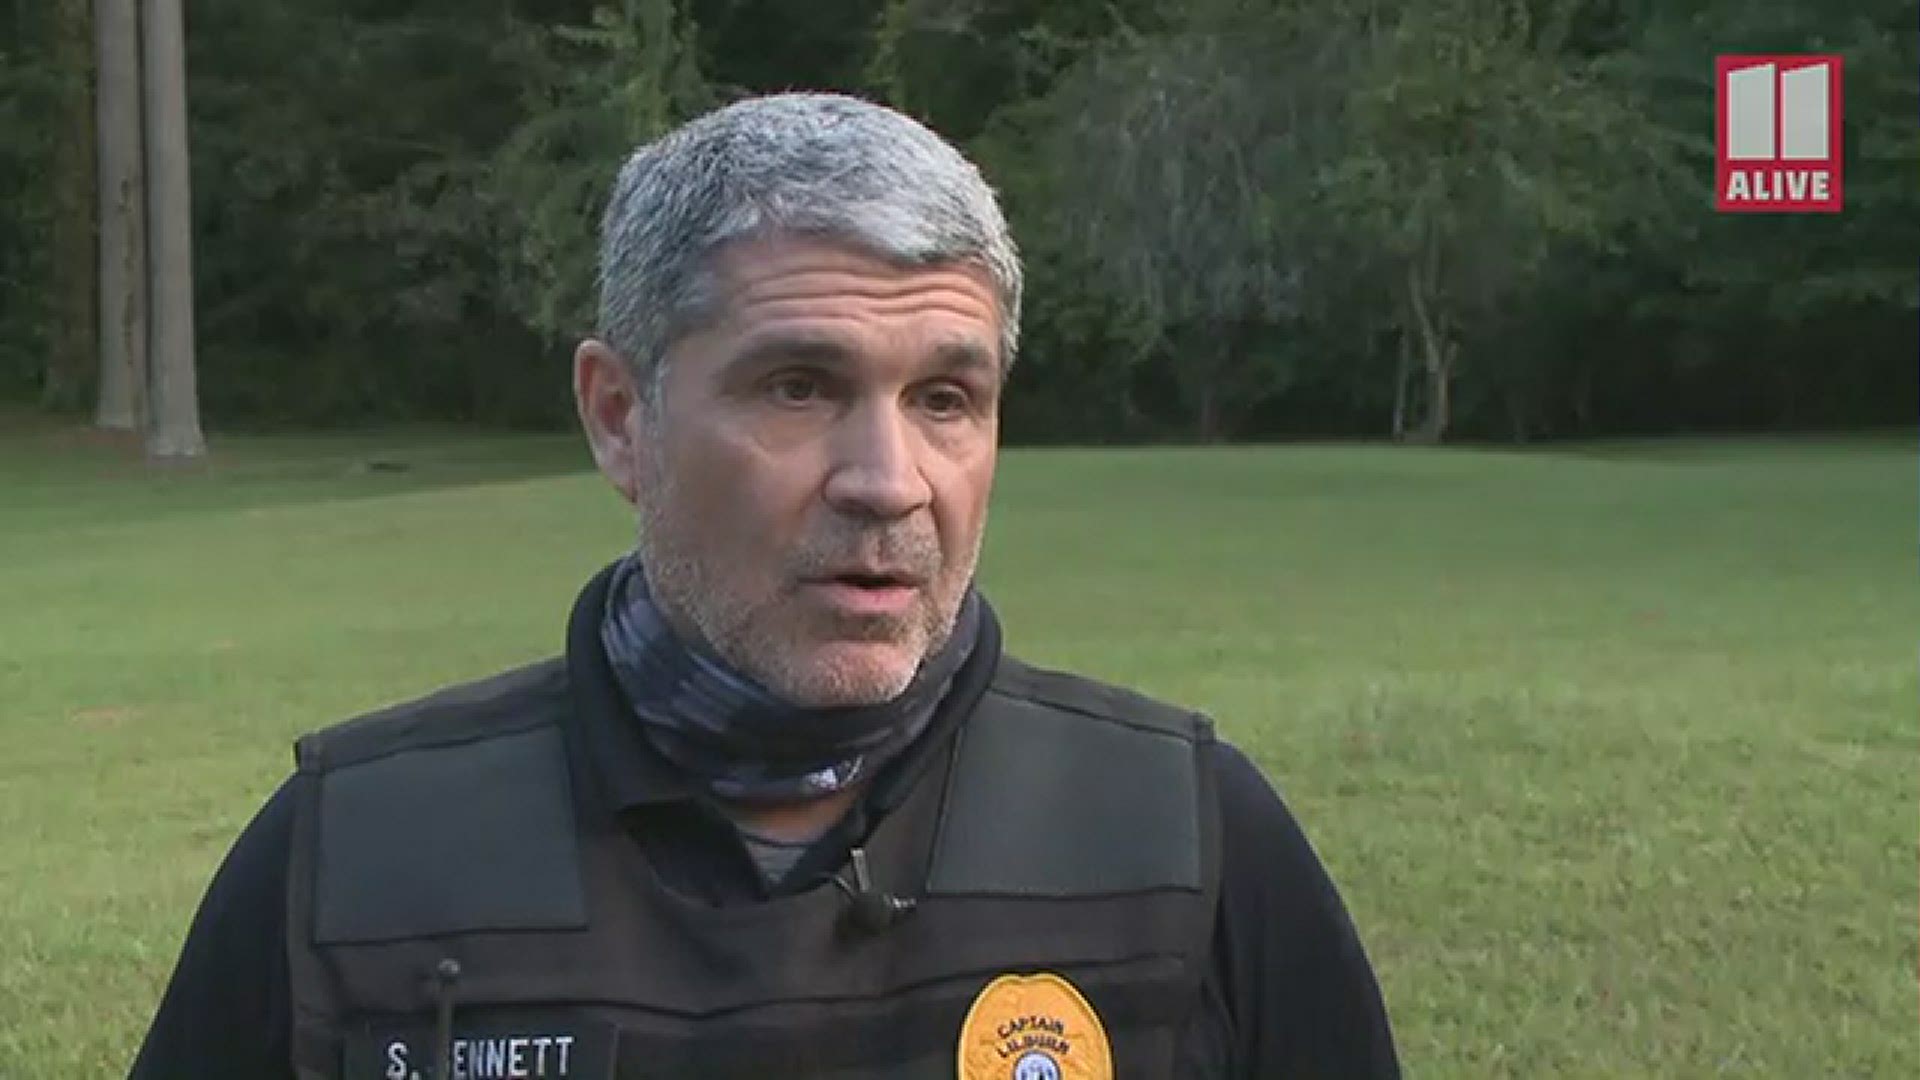 Lilburn Police explain how they were able to locate the women as their case developed.